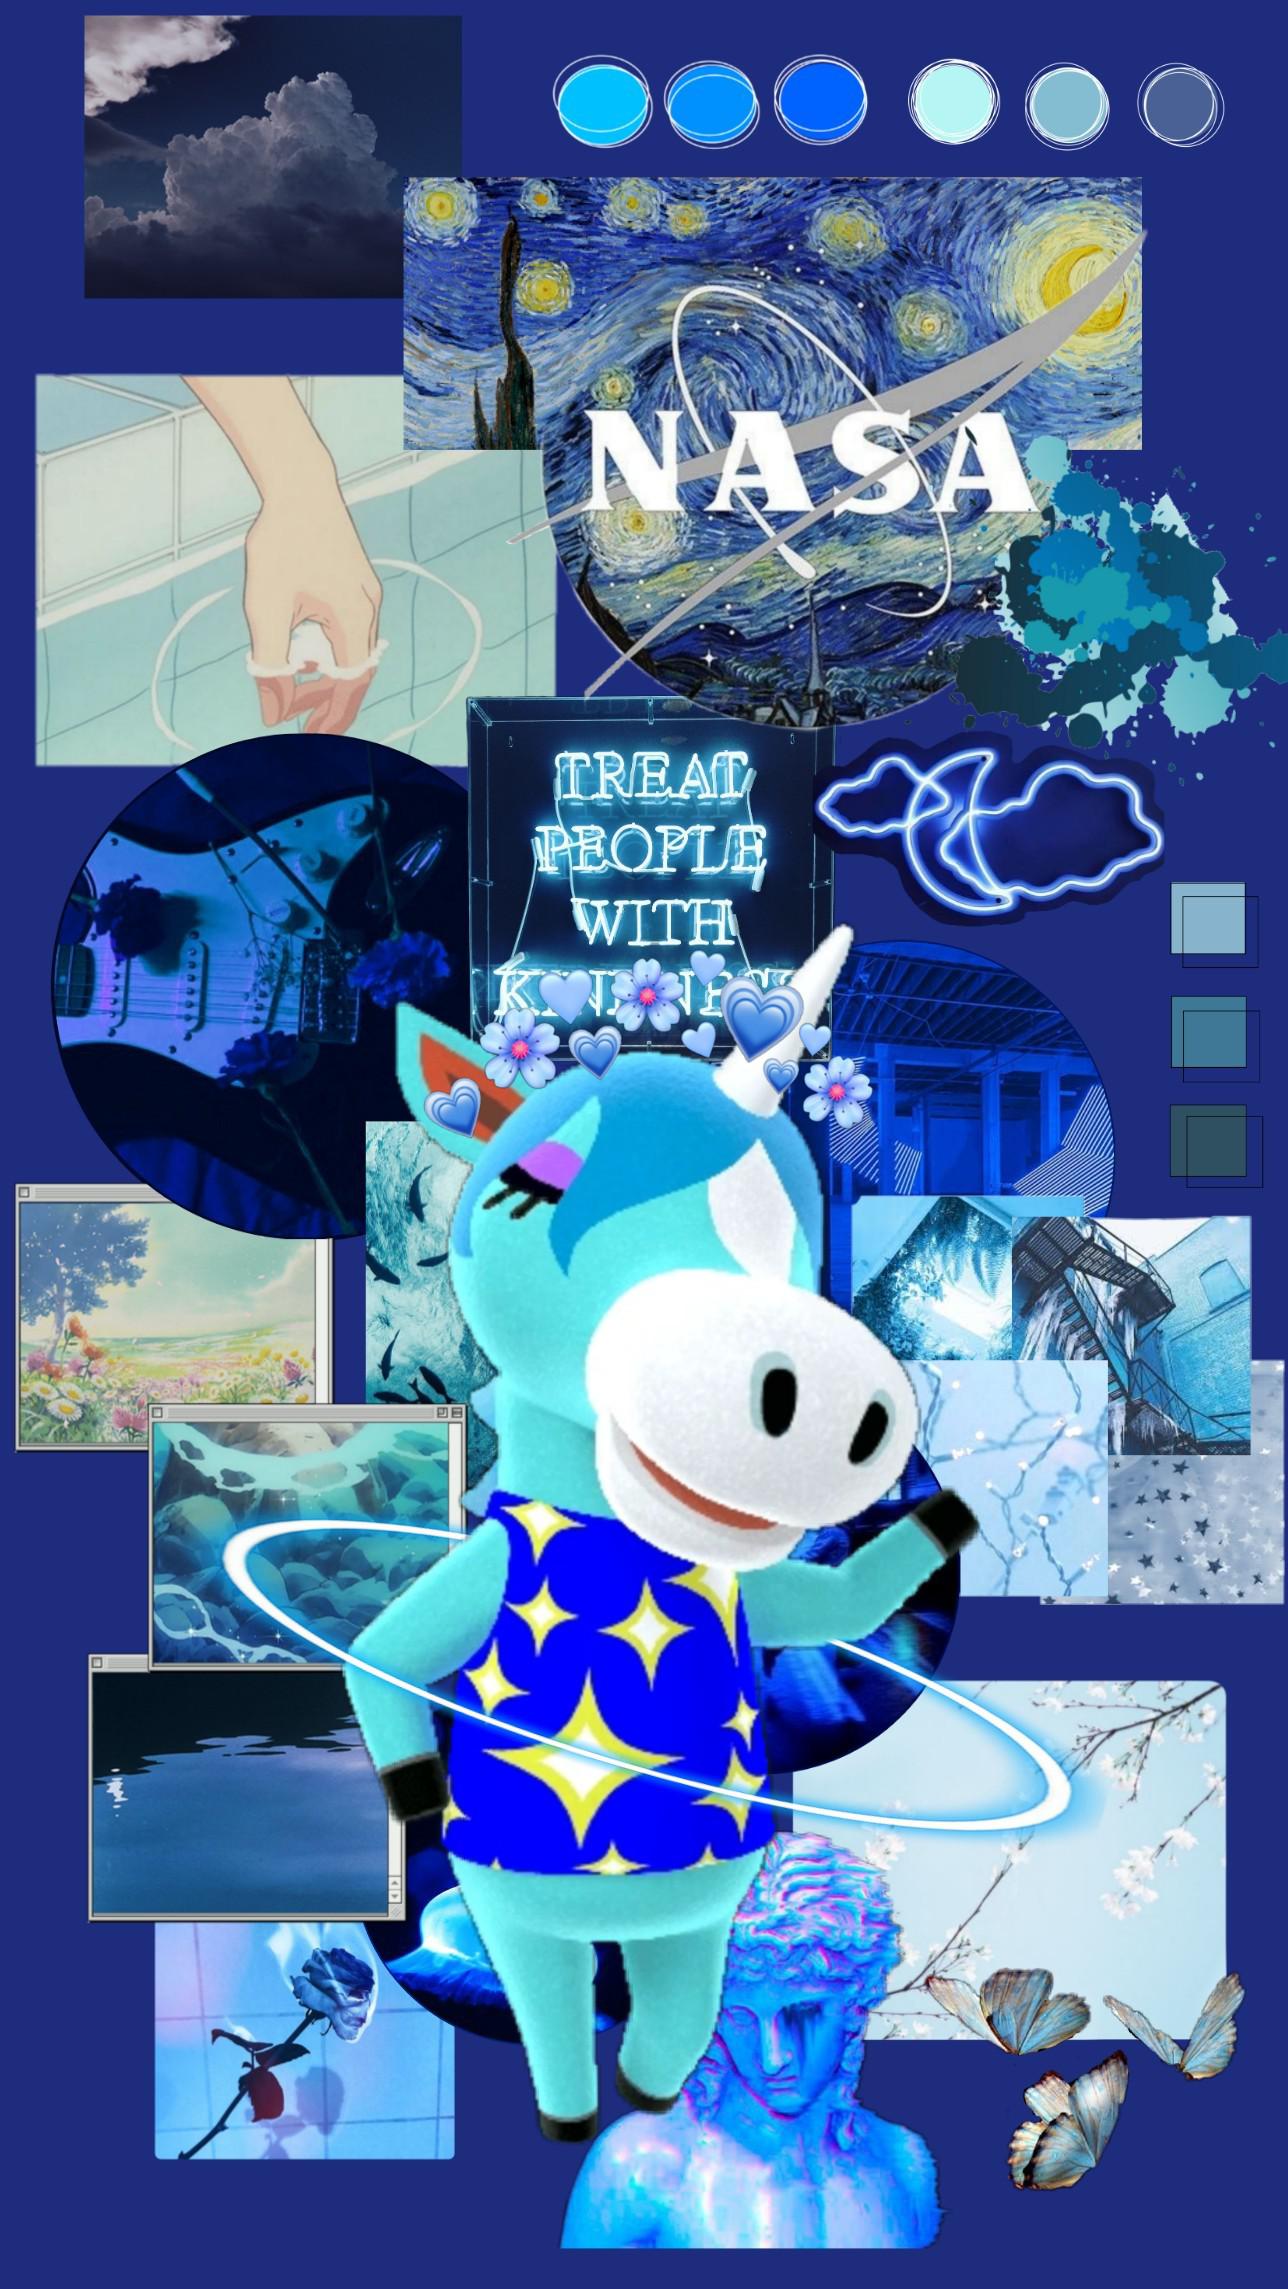 A collage of a blue unicorn, NASA, treat people with kindness, and Van Gogh's Starry Night - Animal Crossing